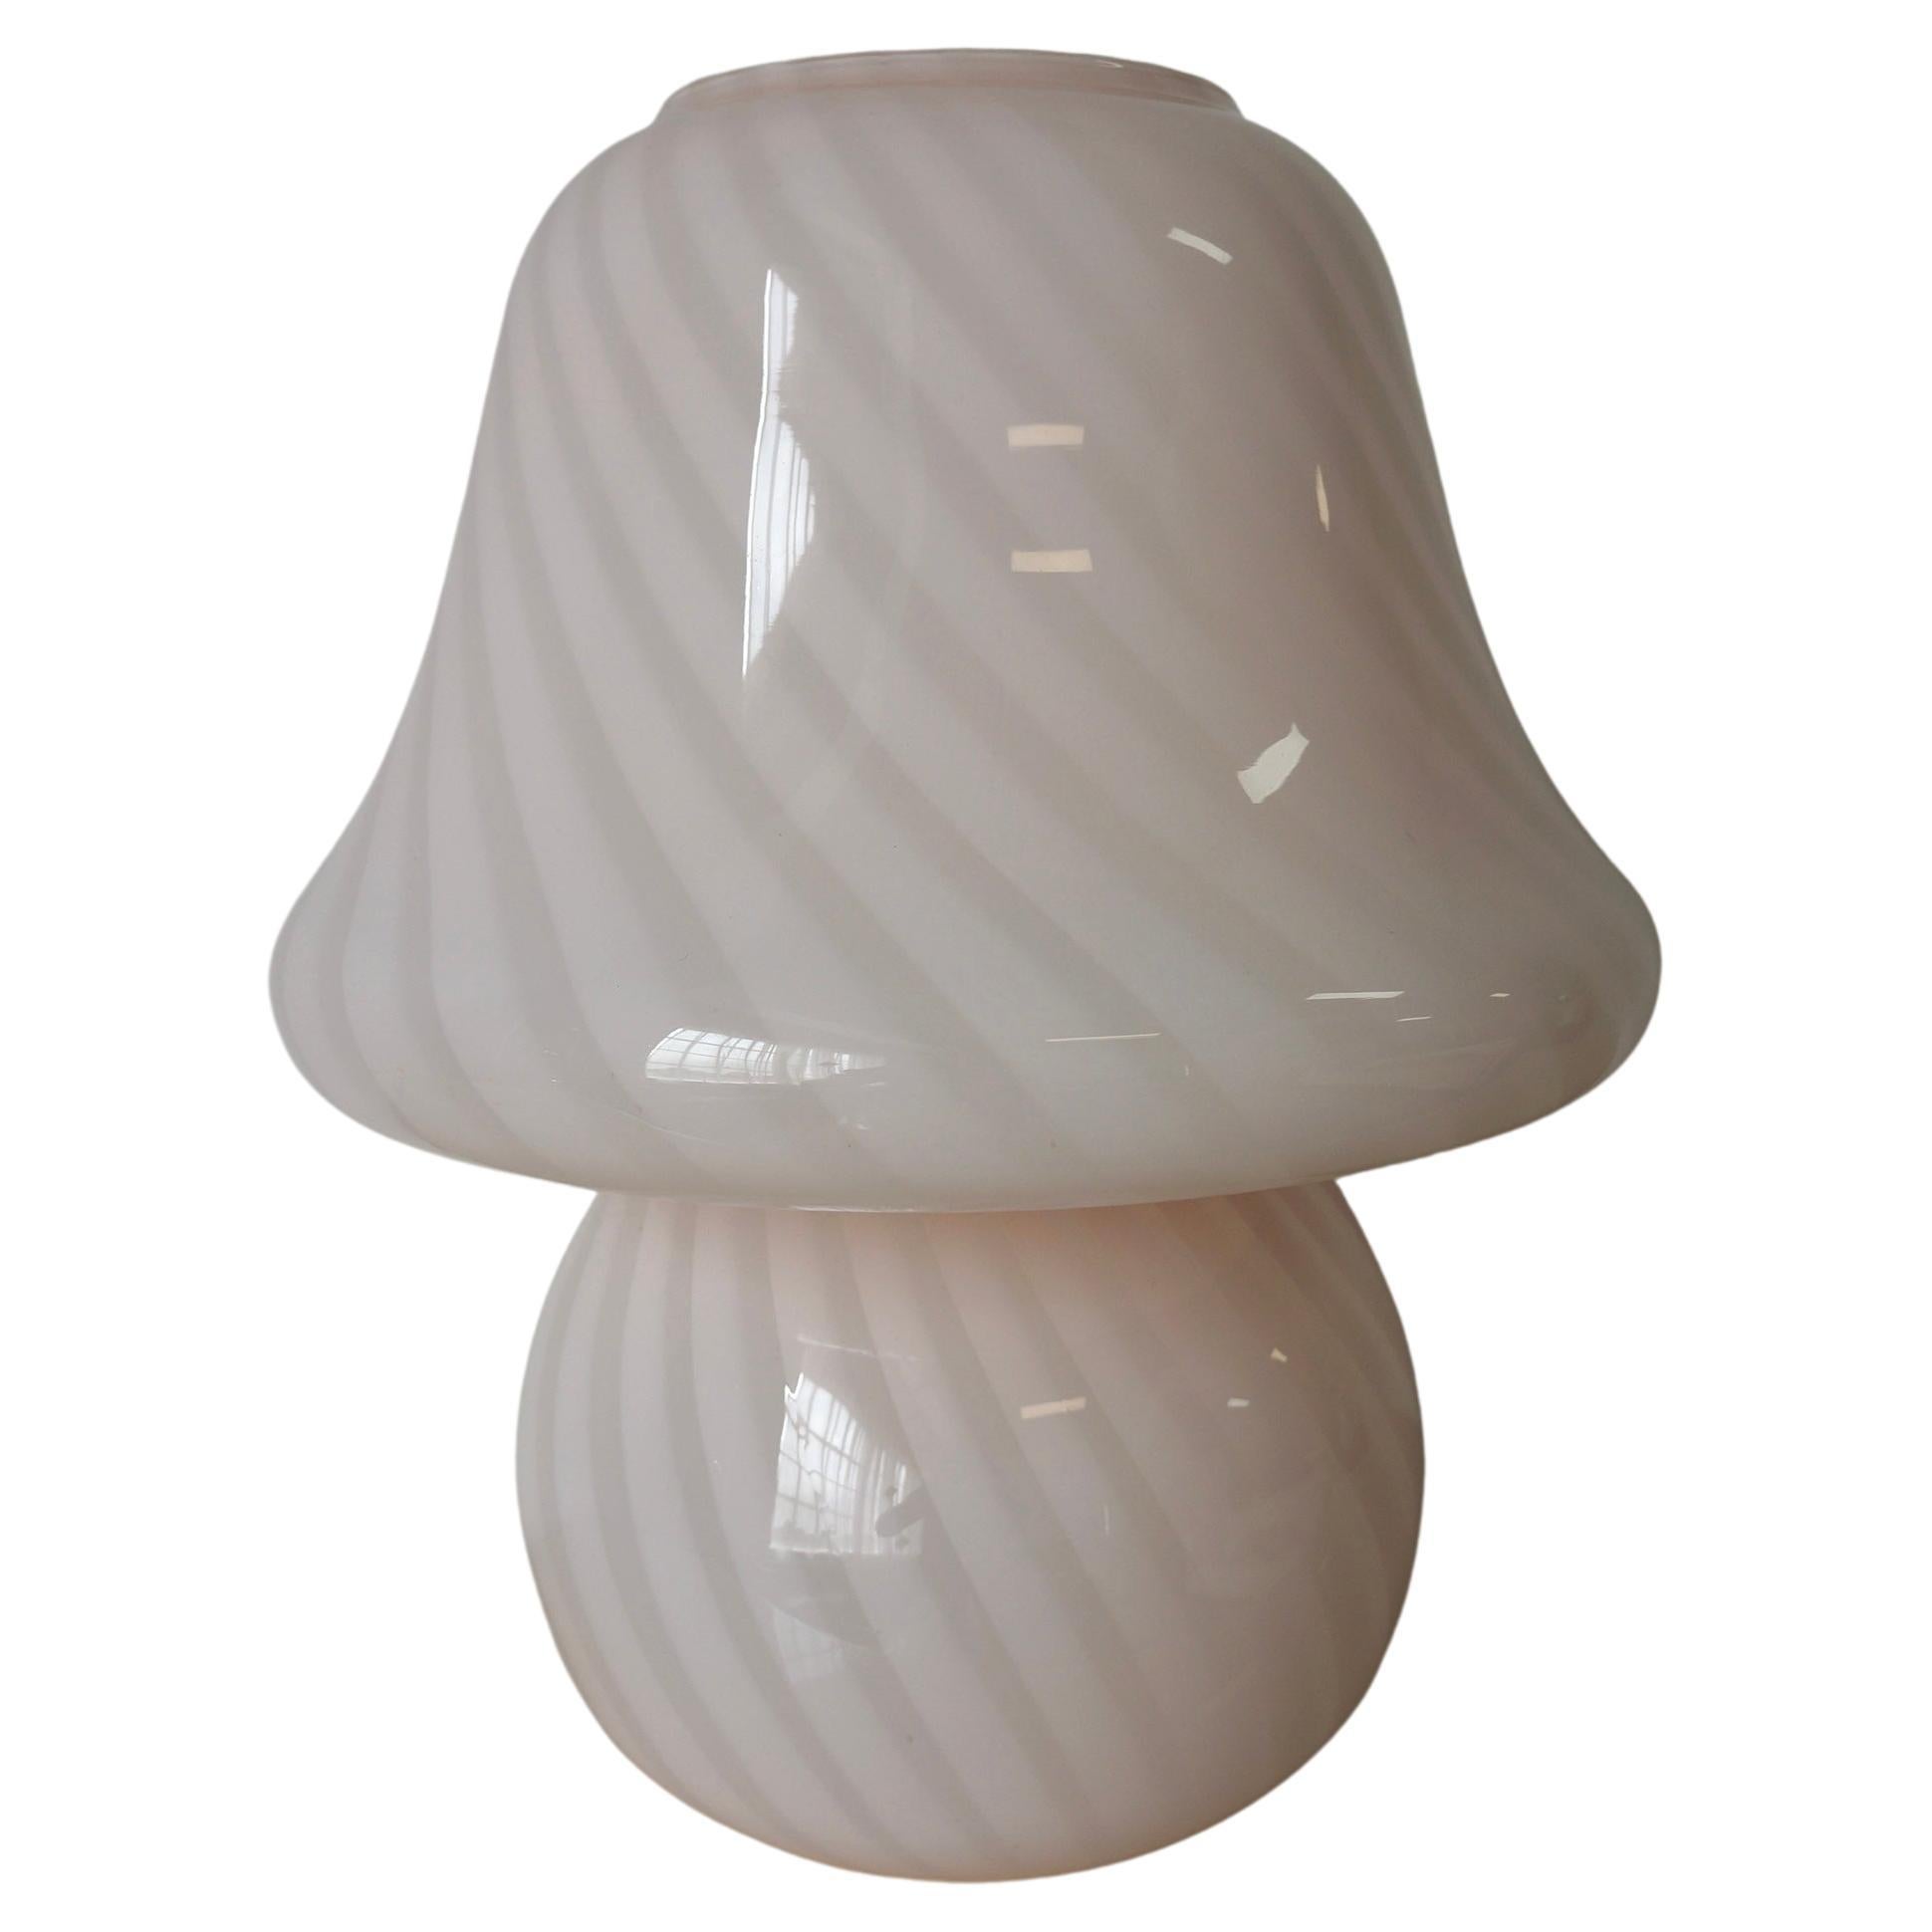 Stunning Murano art glass mushroom lamp with a flared top shape. It was originally made in the island of Murano, Italy in the 1970s by Murano glass artisans. This particular fungi shape and size is a rare find with the flared like top shape. This